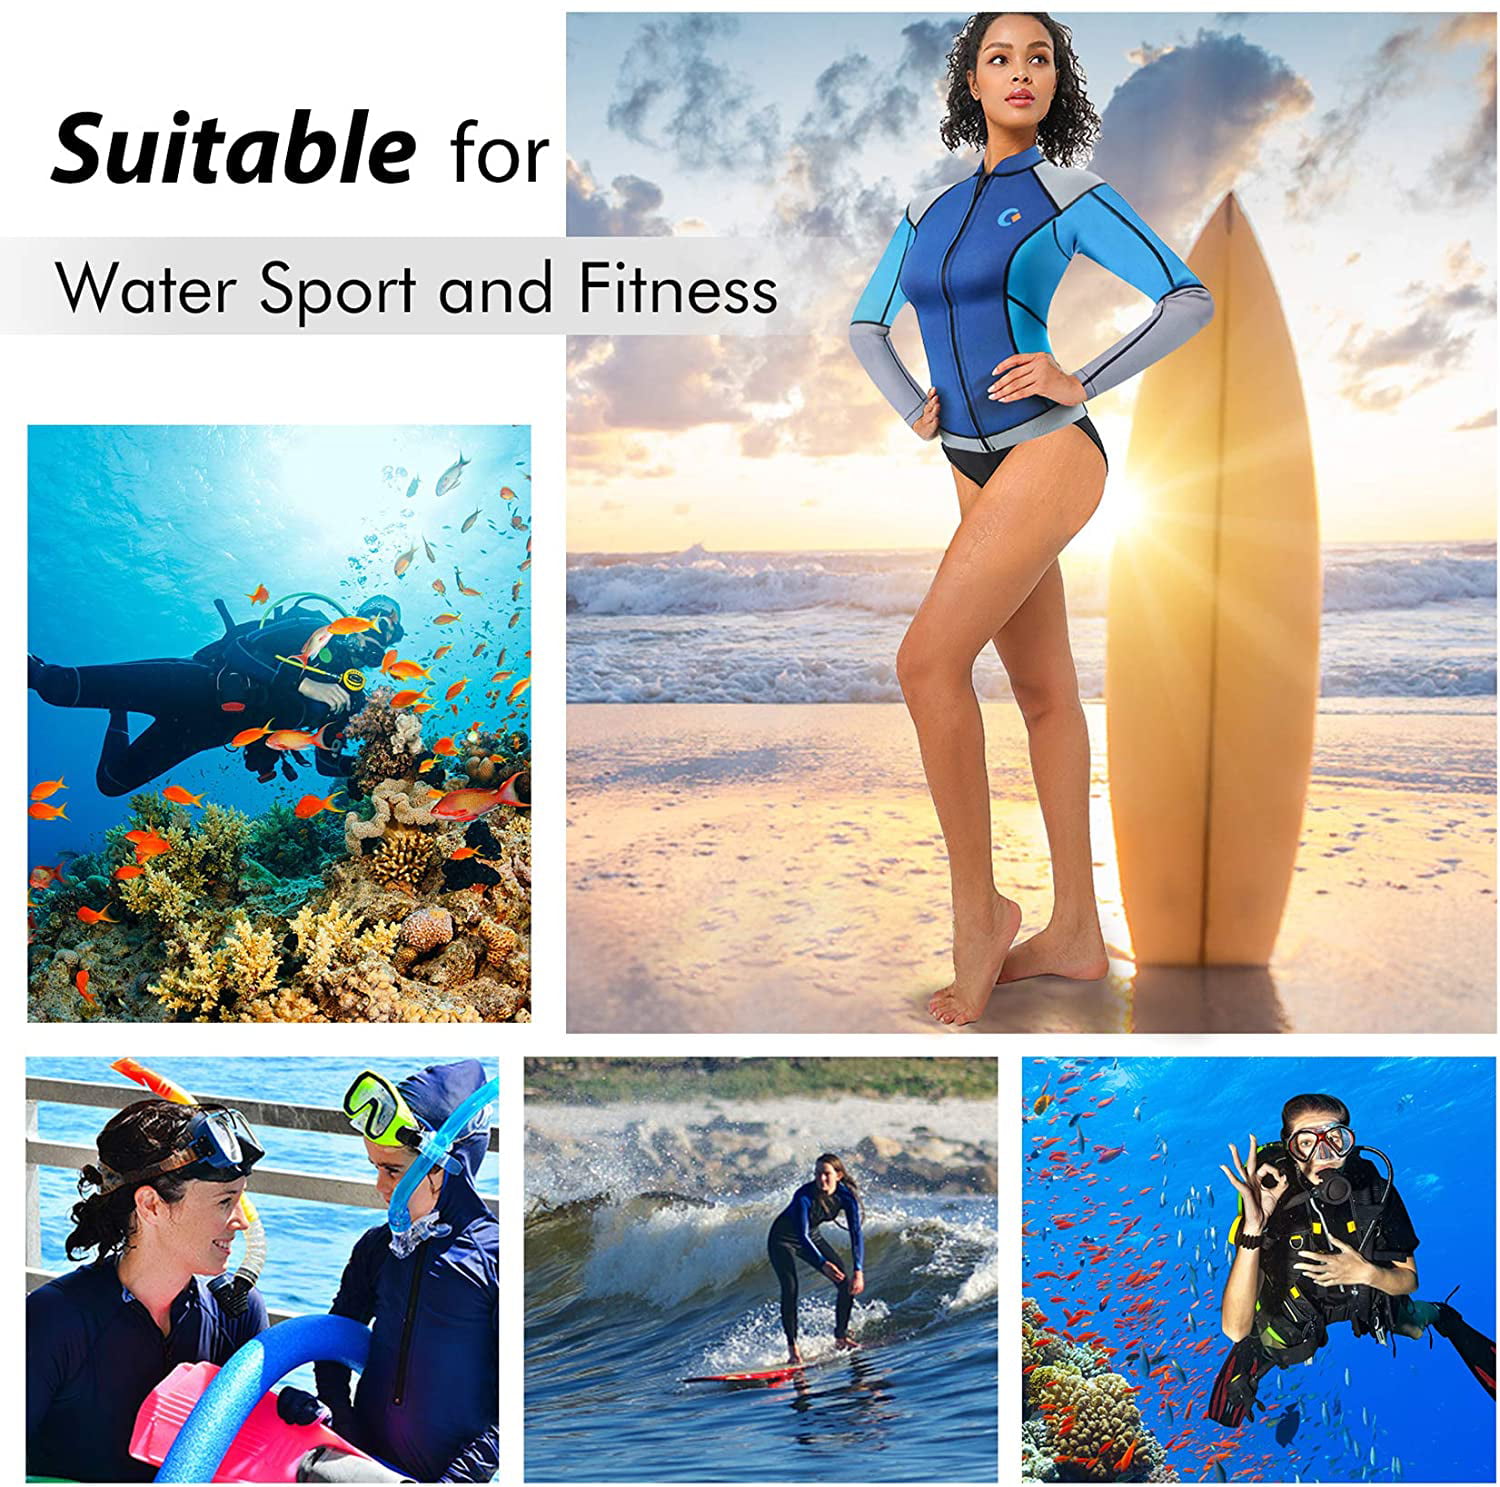 CtriLady Wetsuit Women 2mm Neoprene Full Wetsuit Long Sleeve Diving Suits with Front Zipper UV Protection Full Body Swimwear for Swimming Diving Surfing Kayaking Snorkeling 